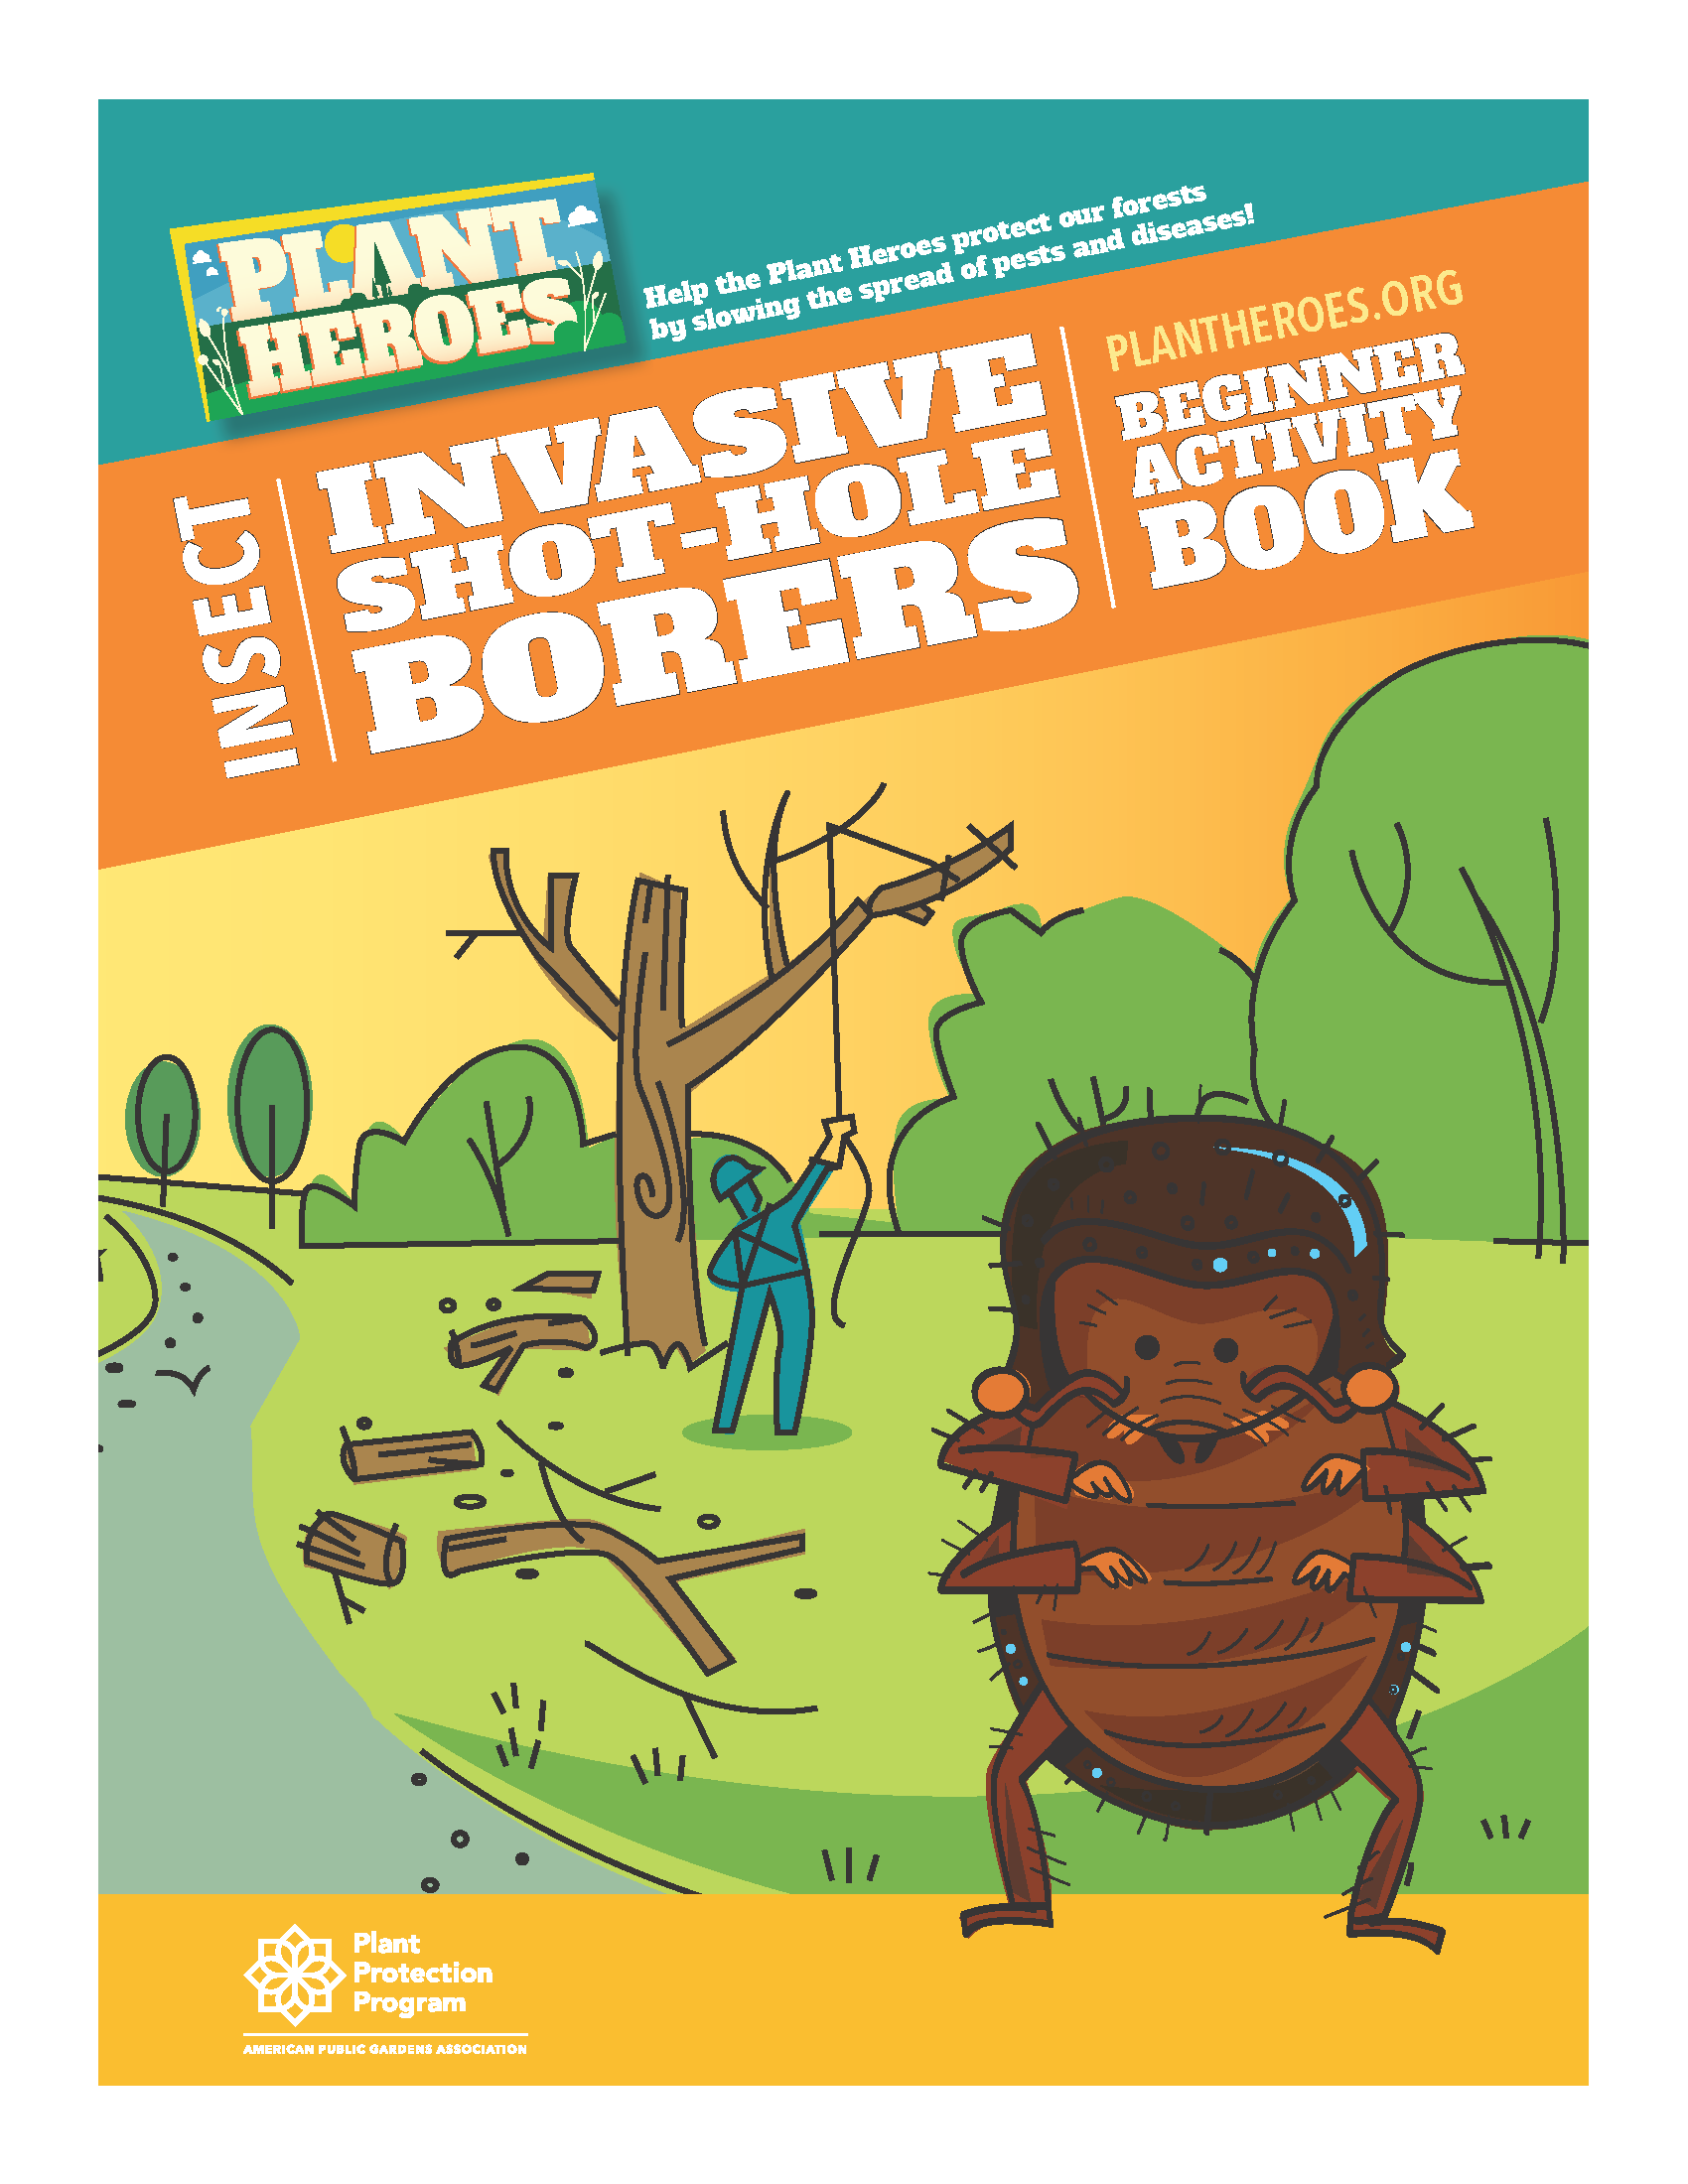 cover image with cartoon character of the invasive shot-hole borers.